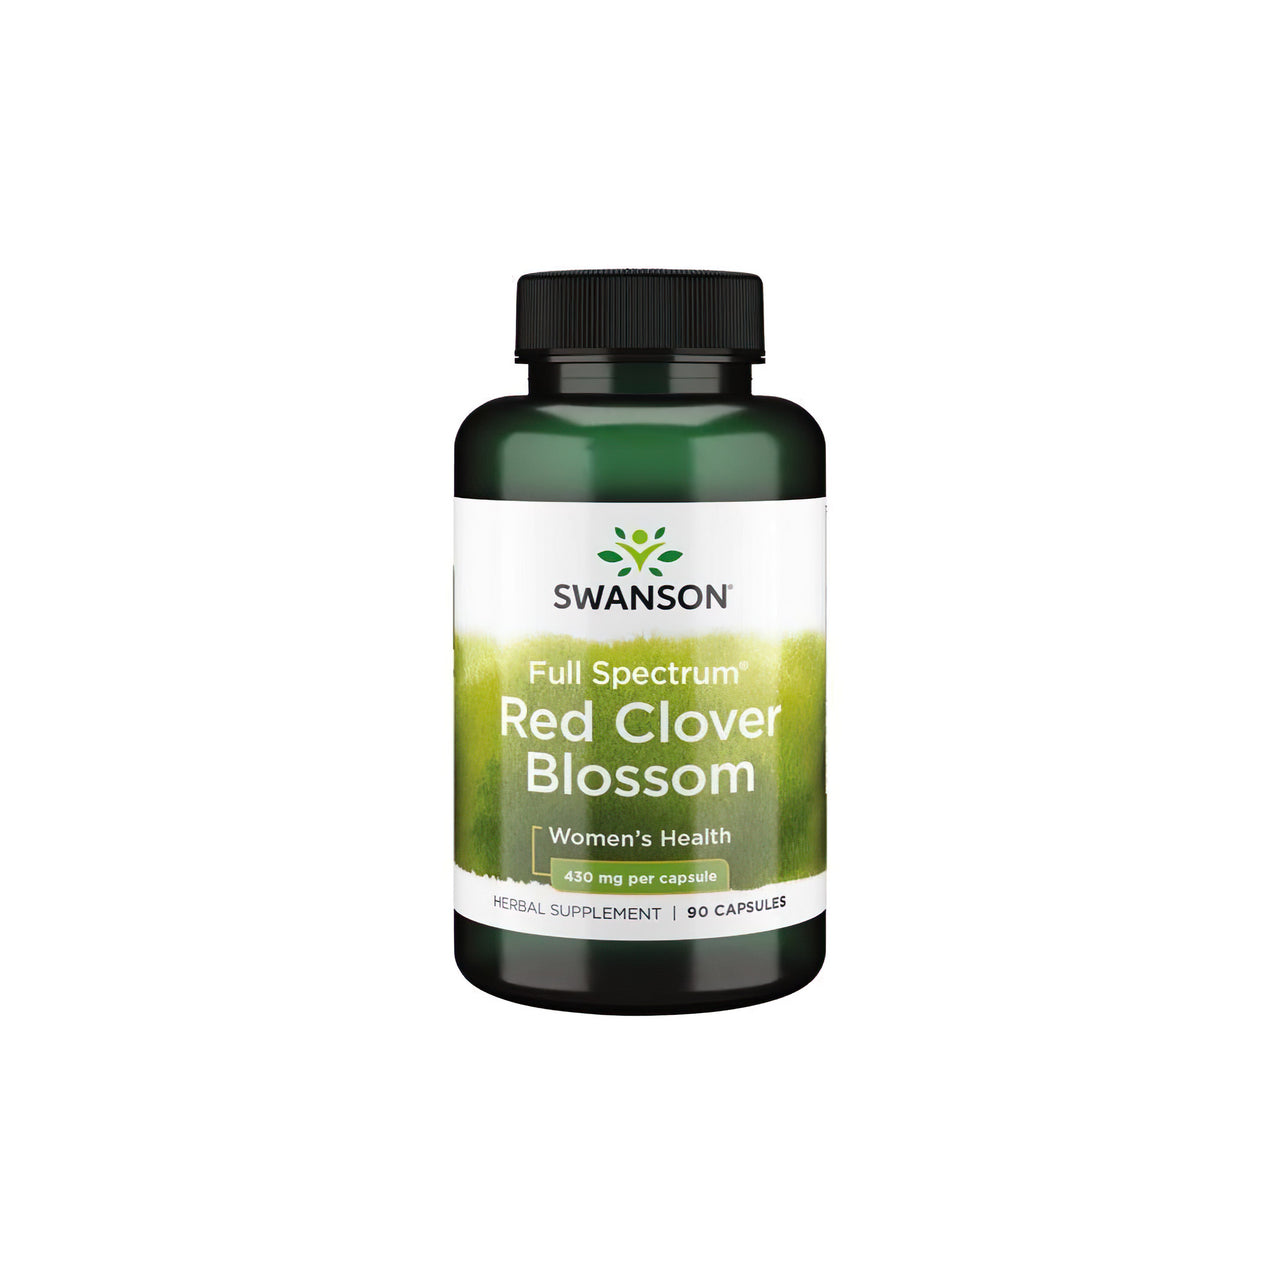 Swanson Red Clover Blossom 430 mg 90 caps is a natural remedy that may provide relief during menopause or the menstrual cycle.